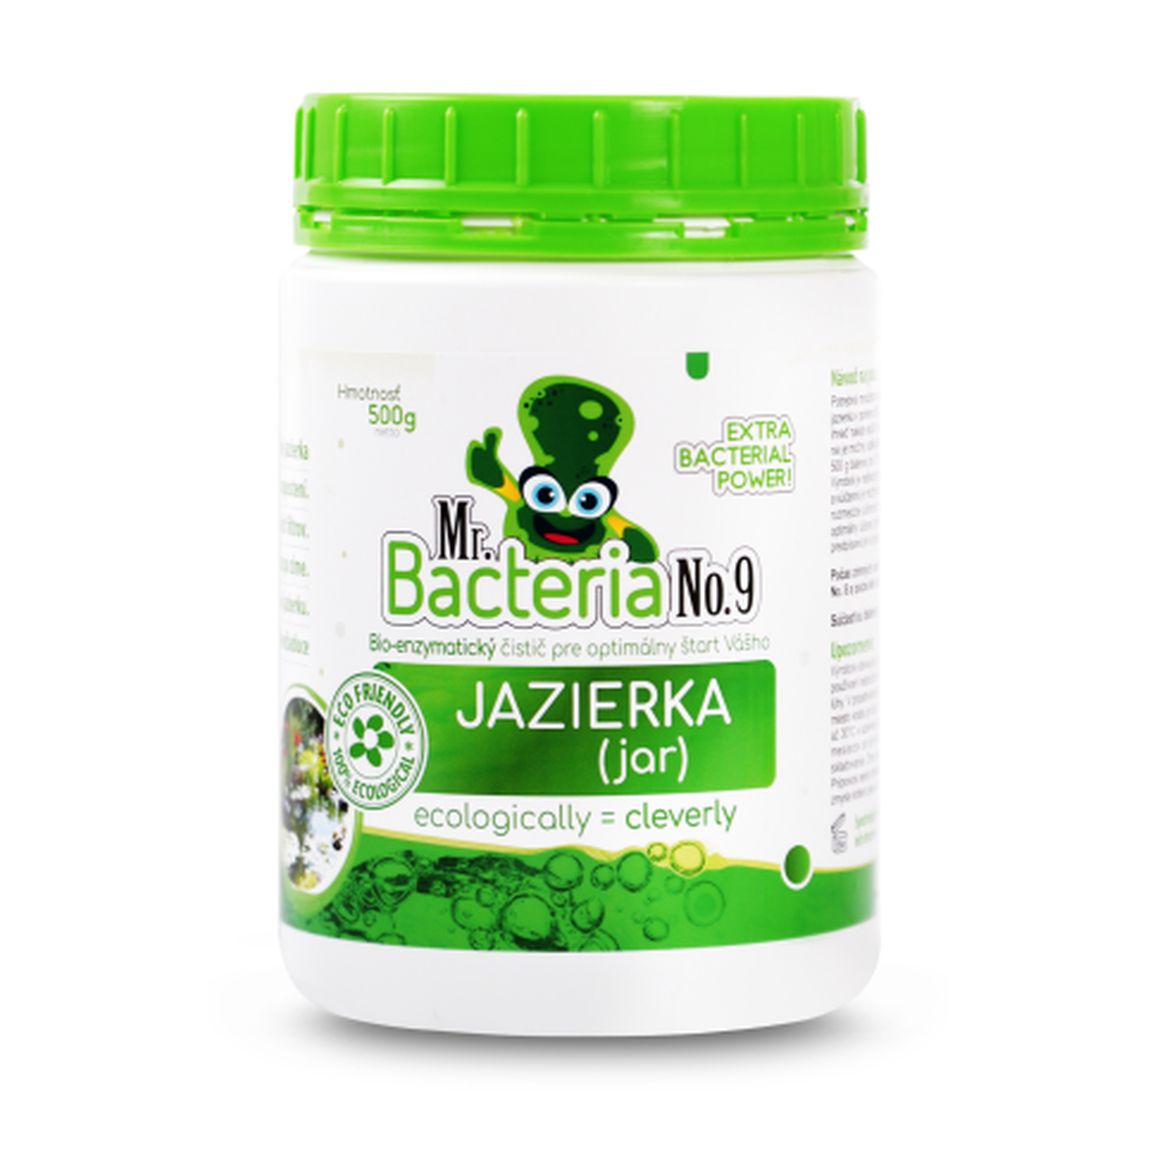 Mr. Bacteria No.9 Bio-enzymatic cleaner for optimal